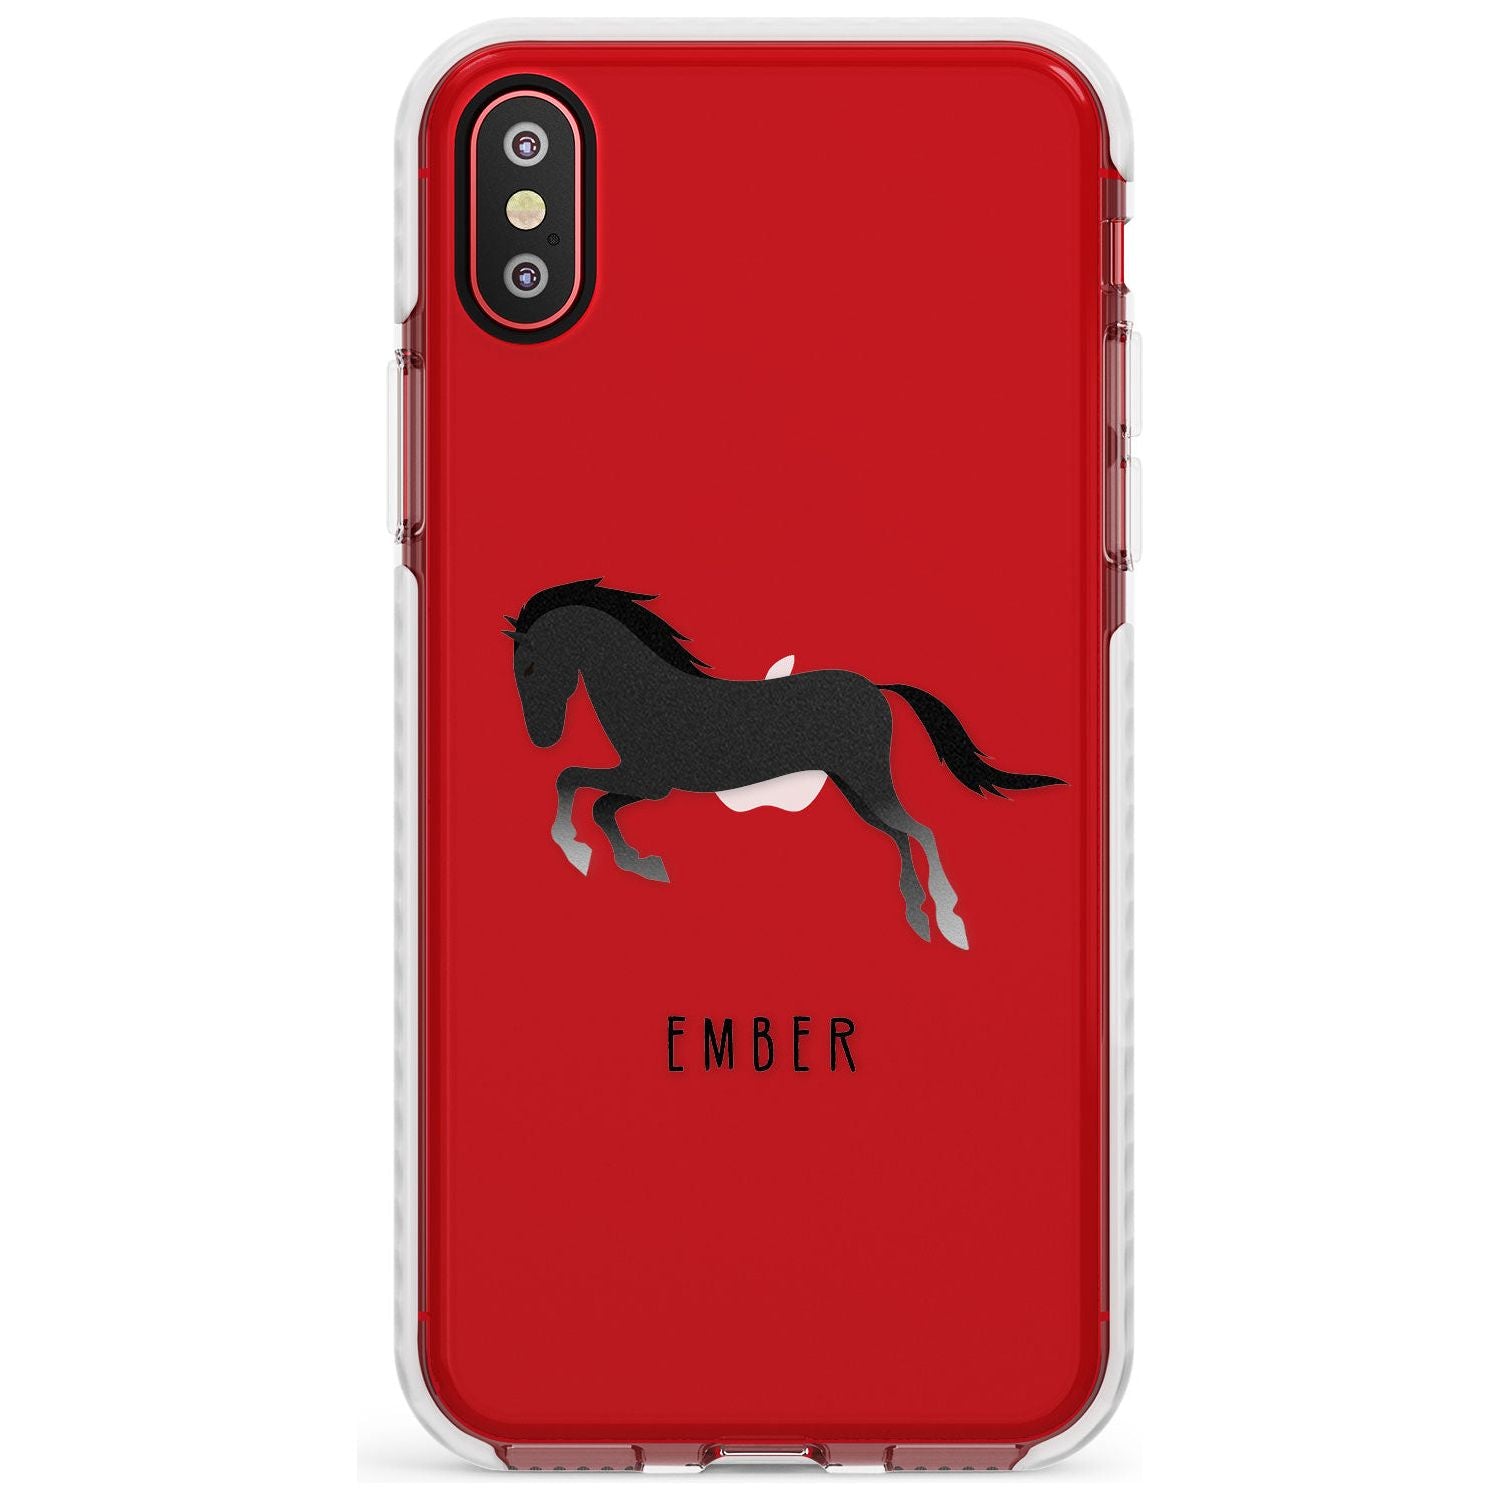 Personalised Black Horse Impact Phone Case for iPhone X XS Max XR